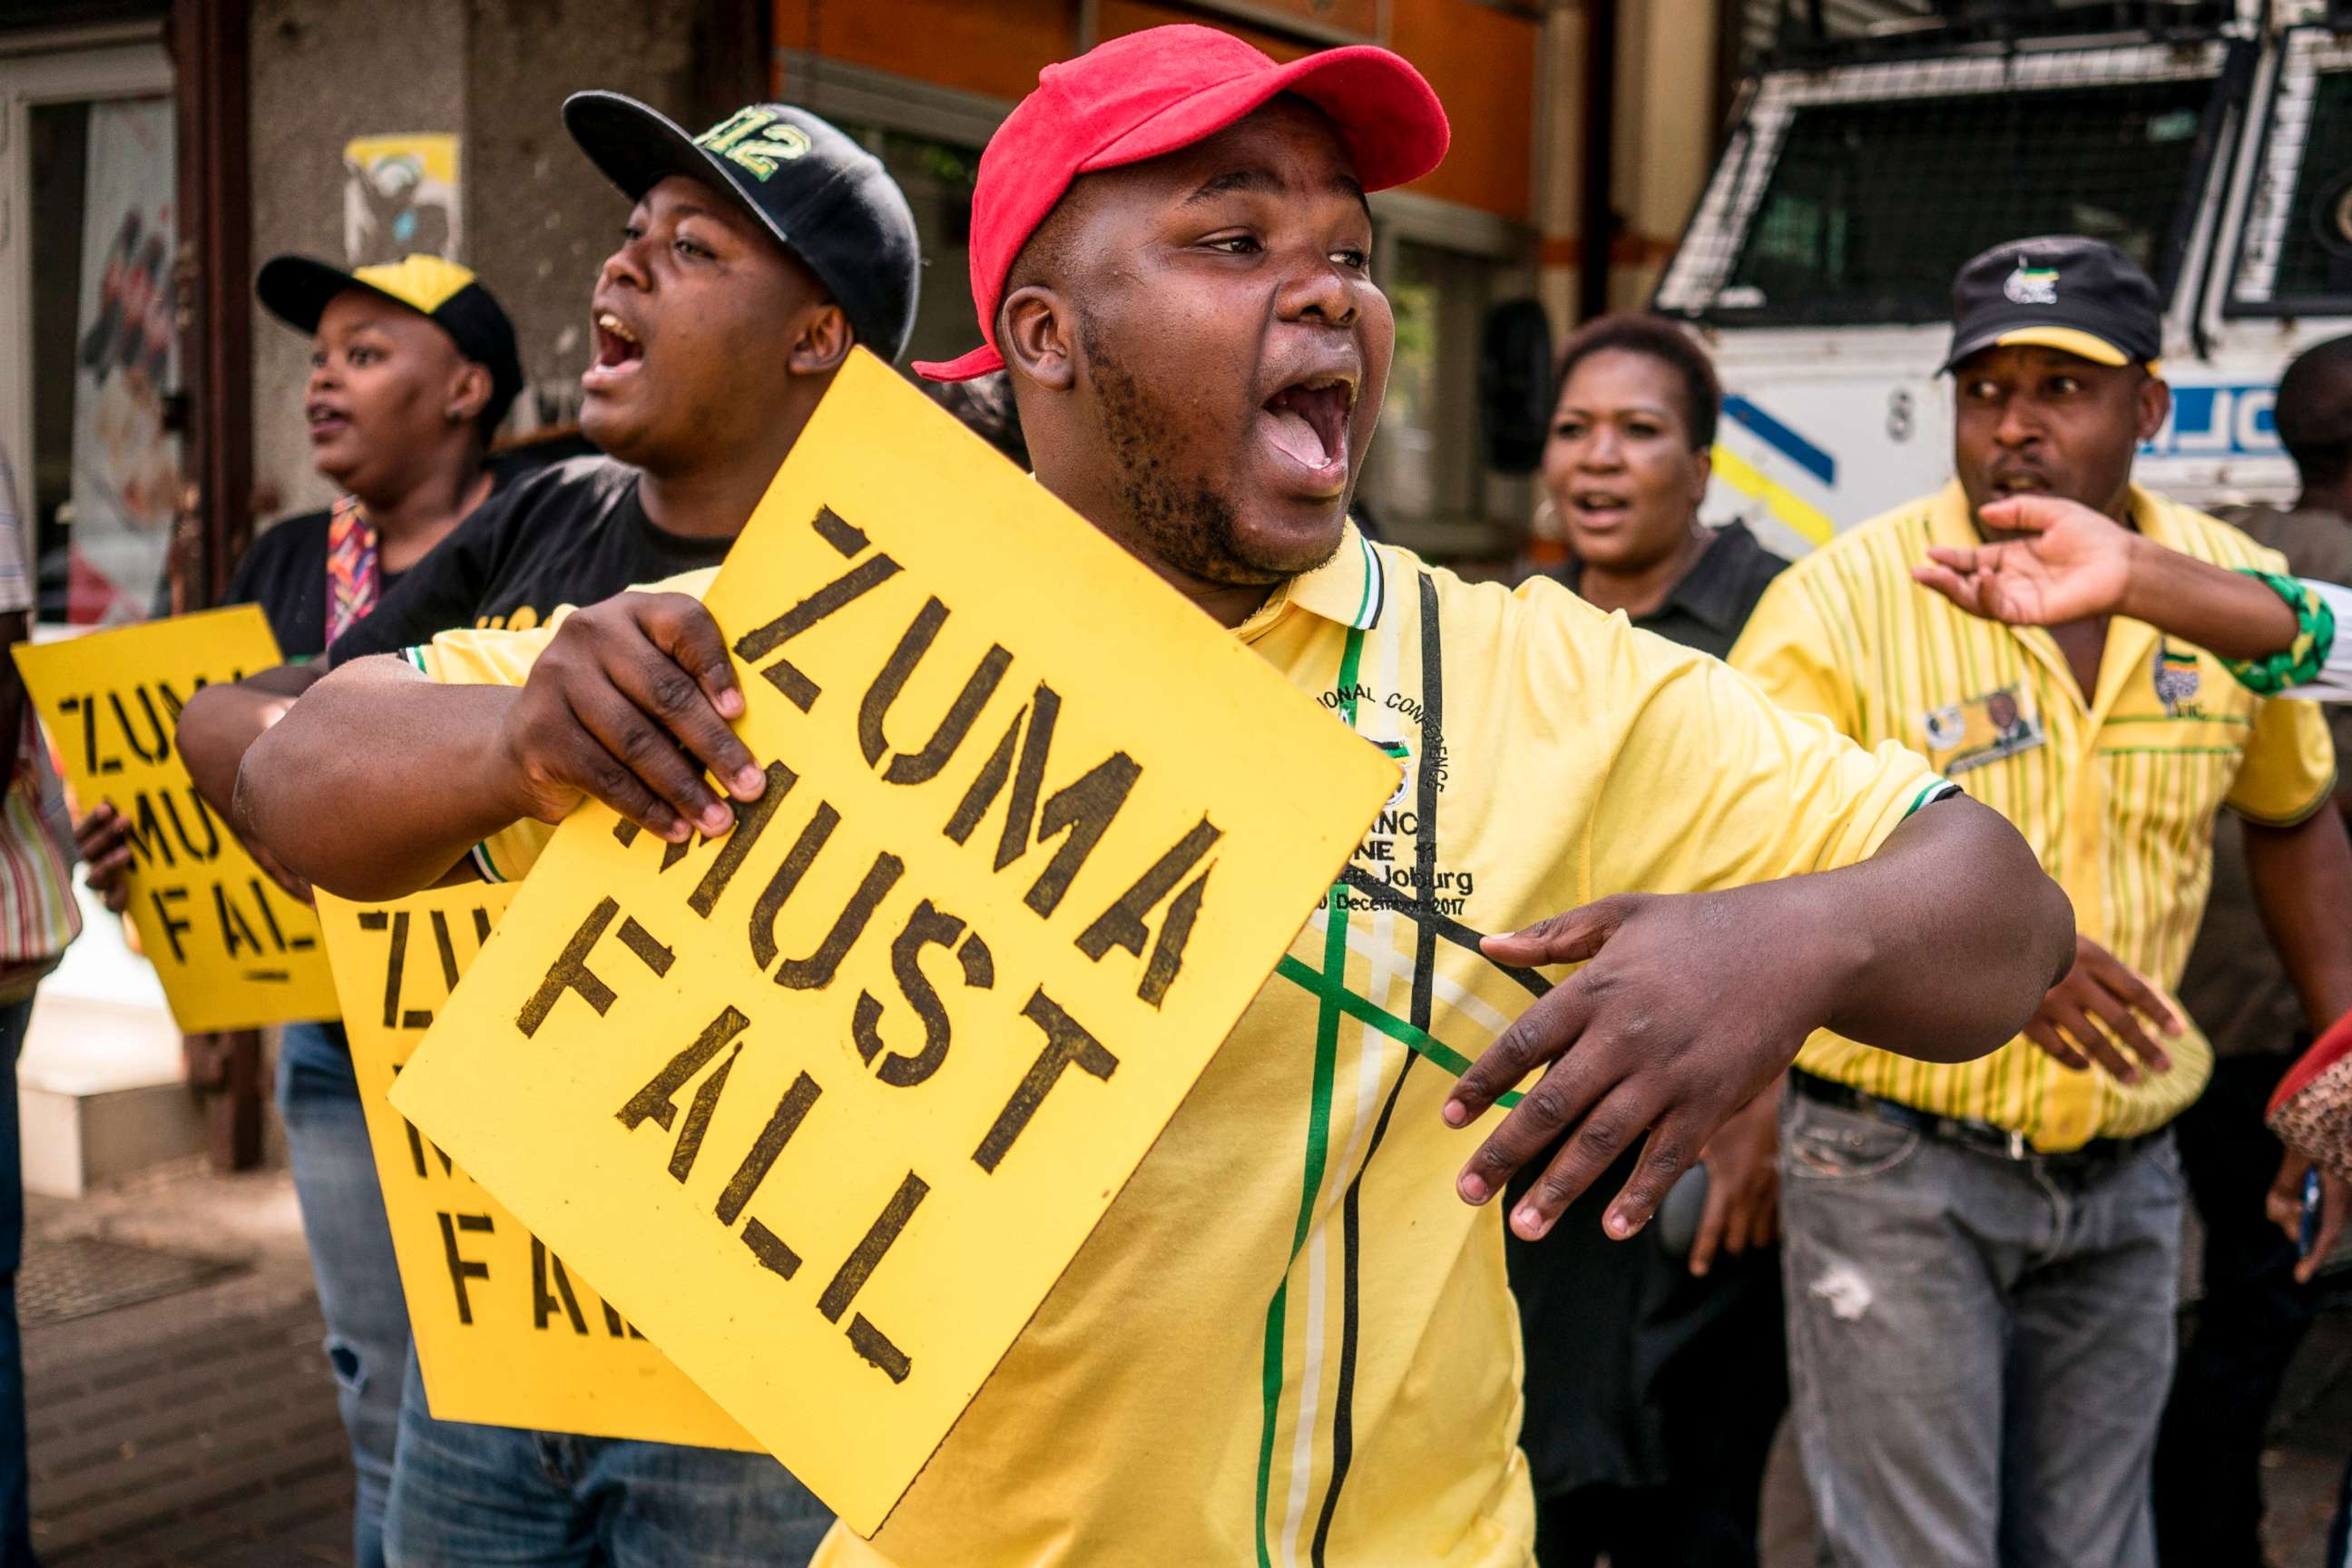 PHOTO: Supporters of the African National Congress Deputy President Cyril Ramaphosa hold placards and chant slogans outside the ANC party headquarters in Johannesburg, Feb. 5, 2018.